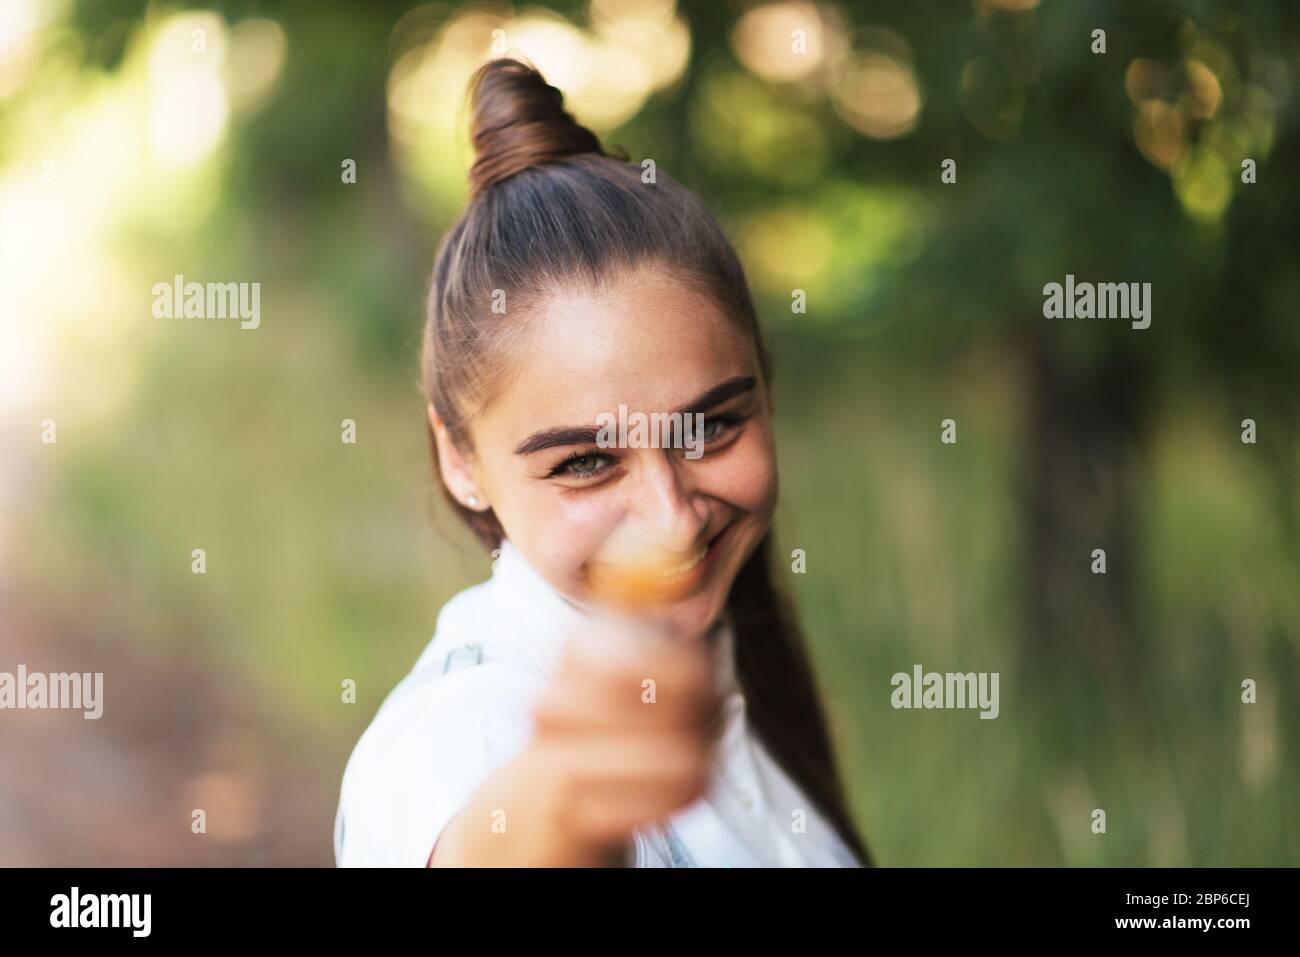 The girl shows the candy on a stick in the frame.  Stock Photo